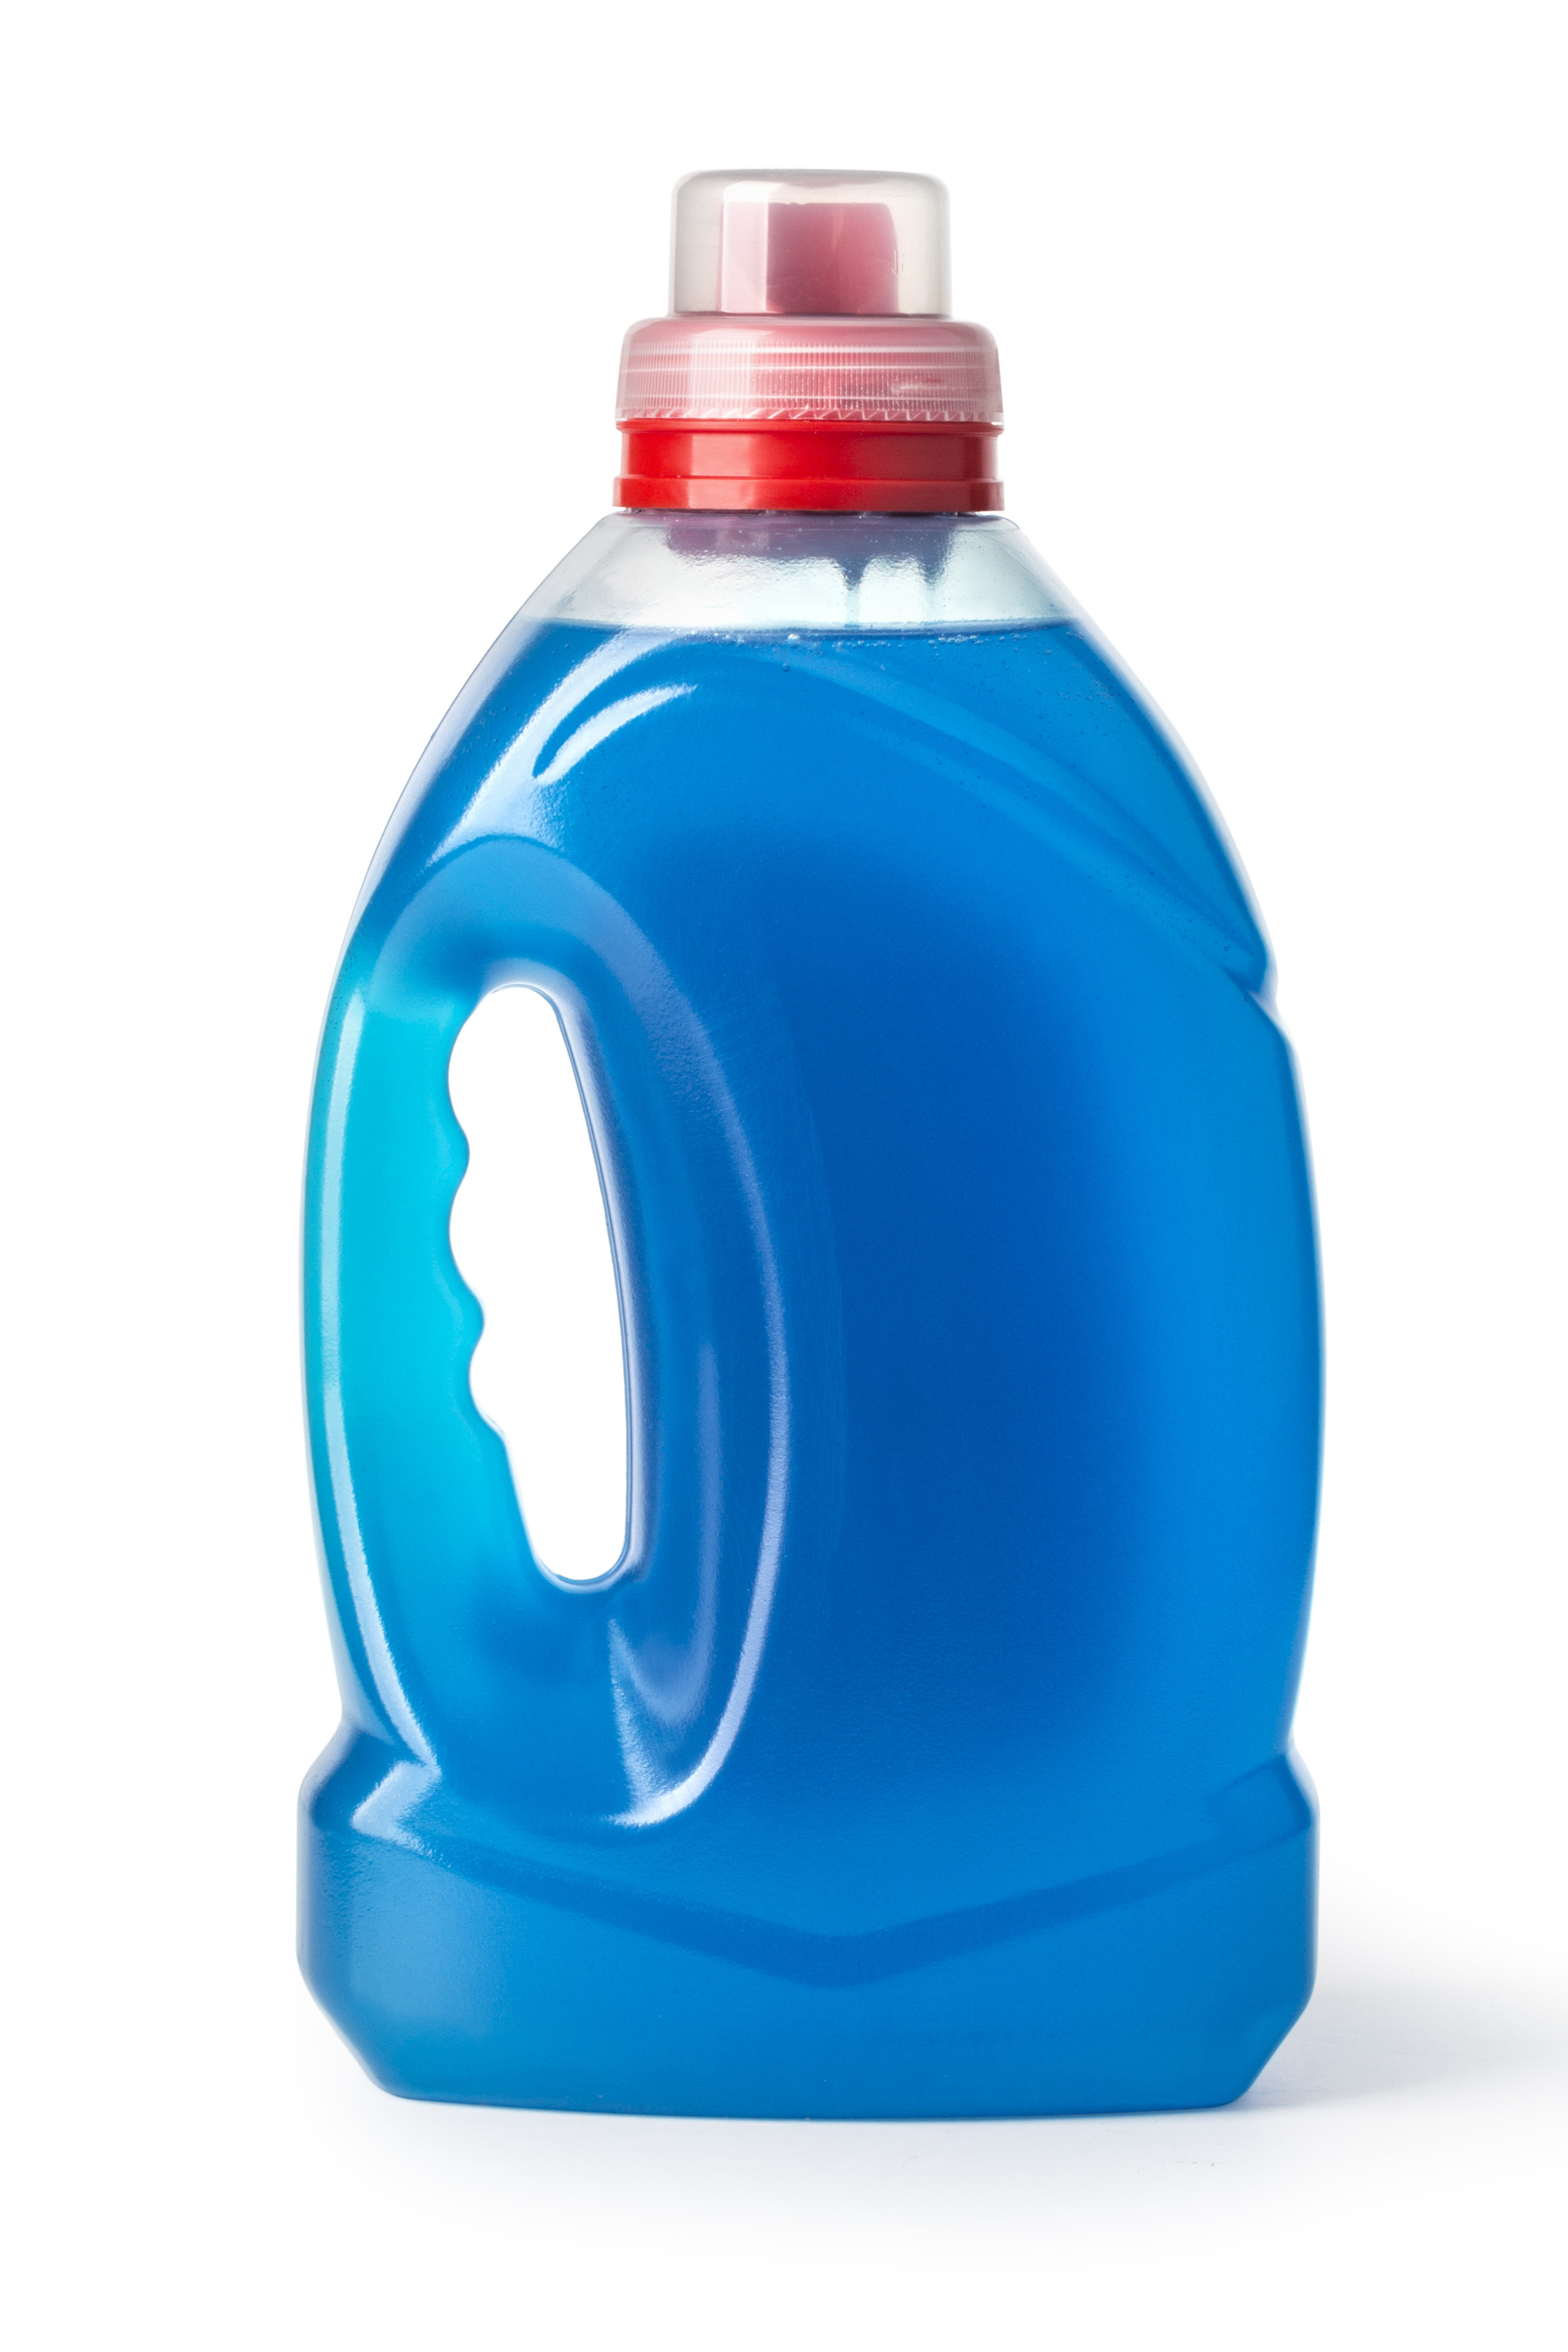 Plastic detergent container on white background  